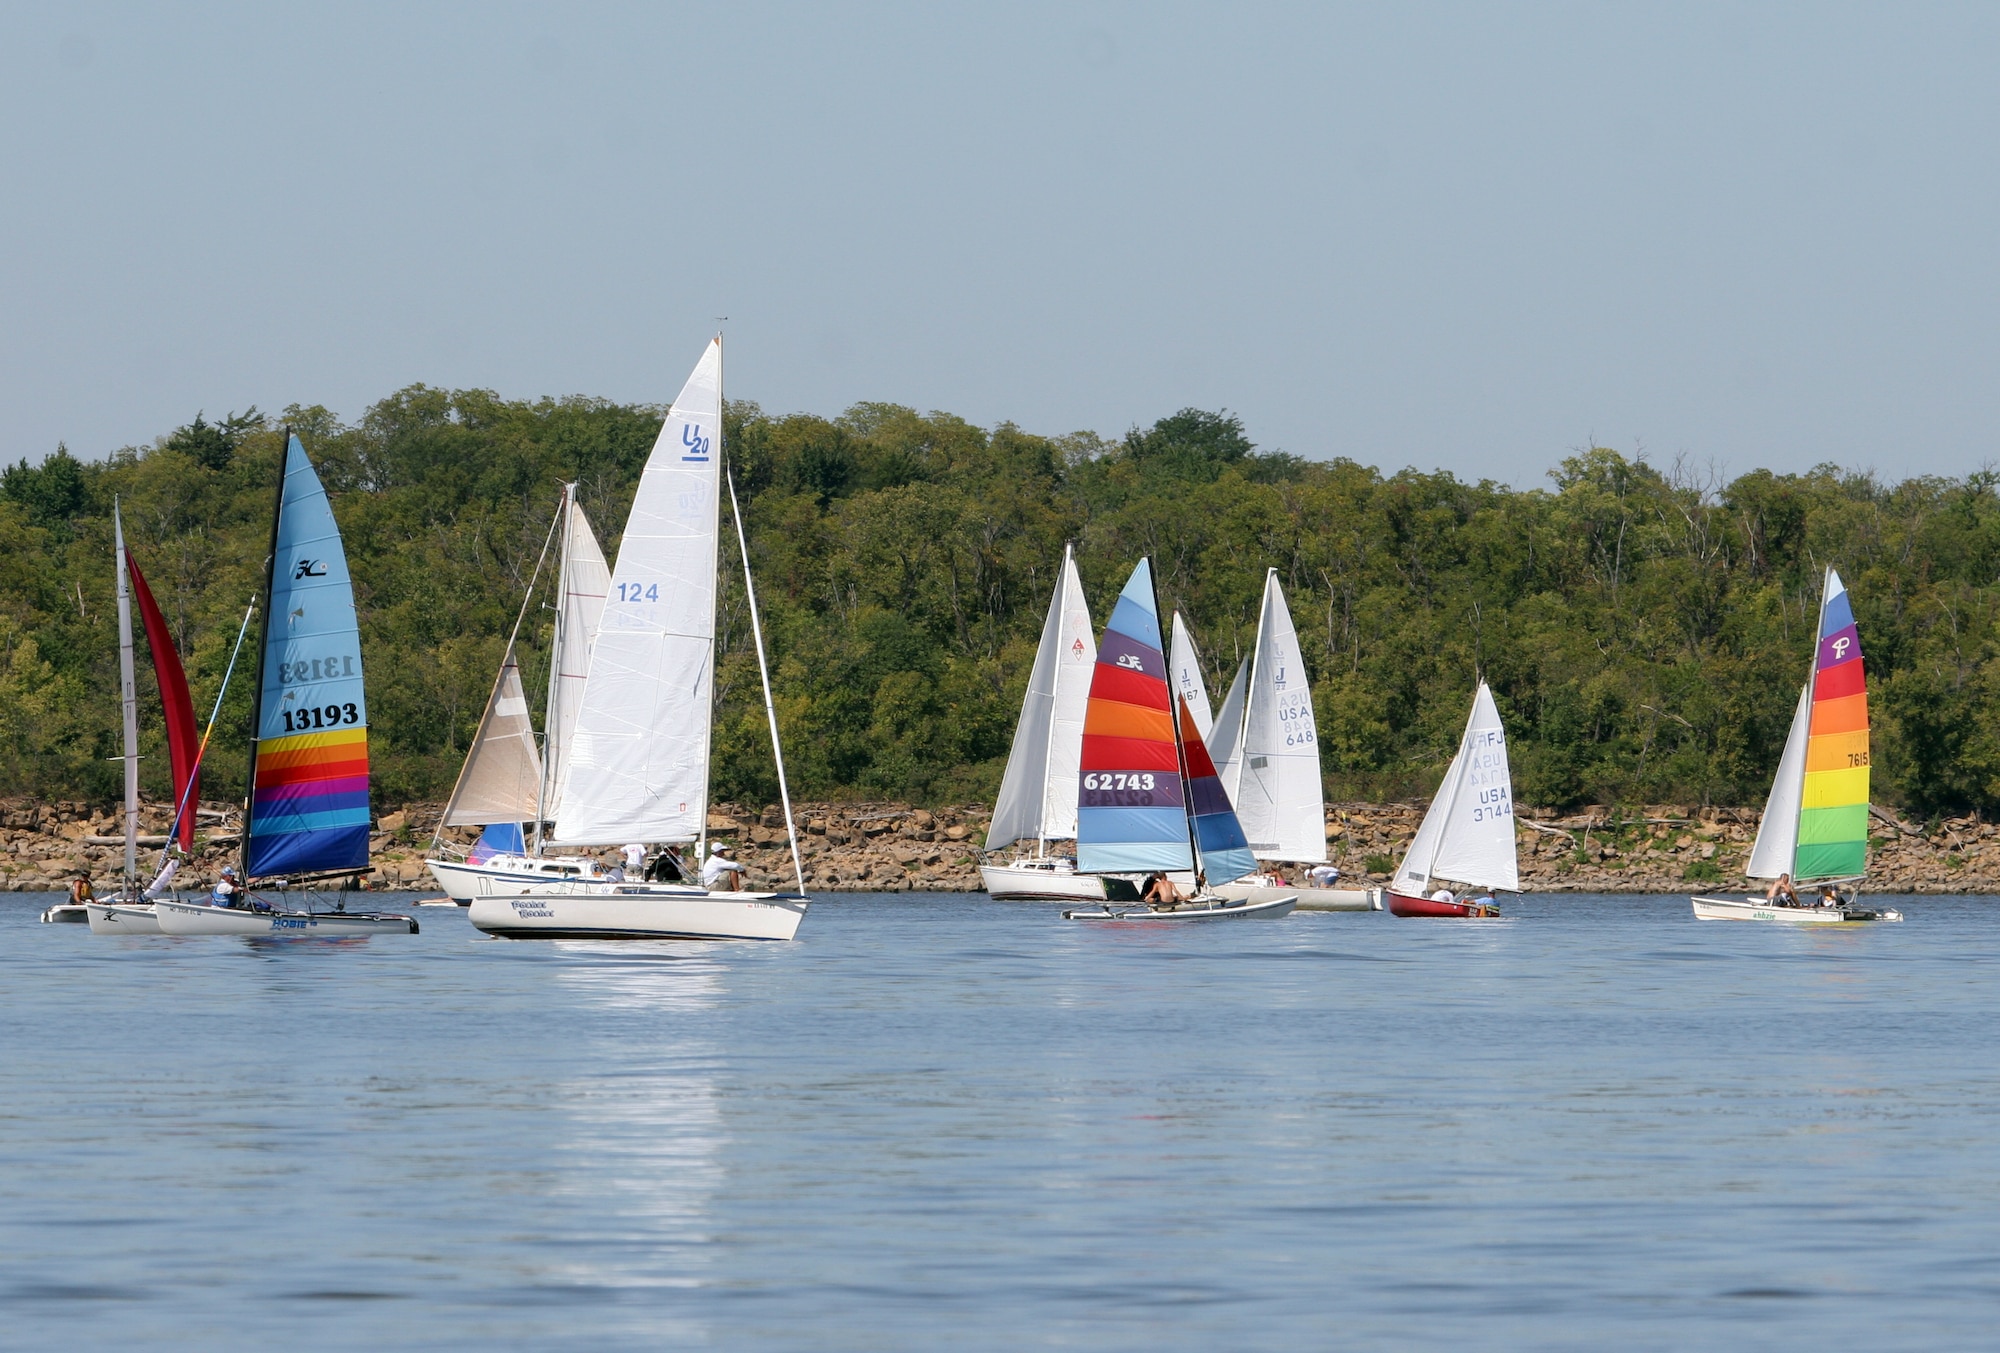 Several brightly colored sailboats can be seen on Perry Lake with water in the foreground and trees and sky in the background.